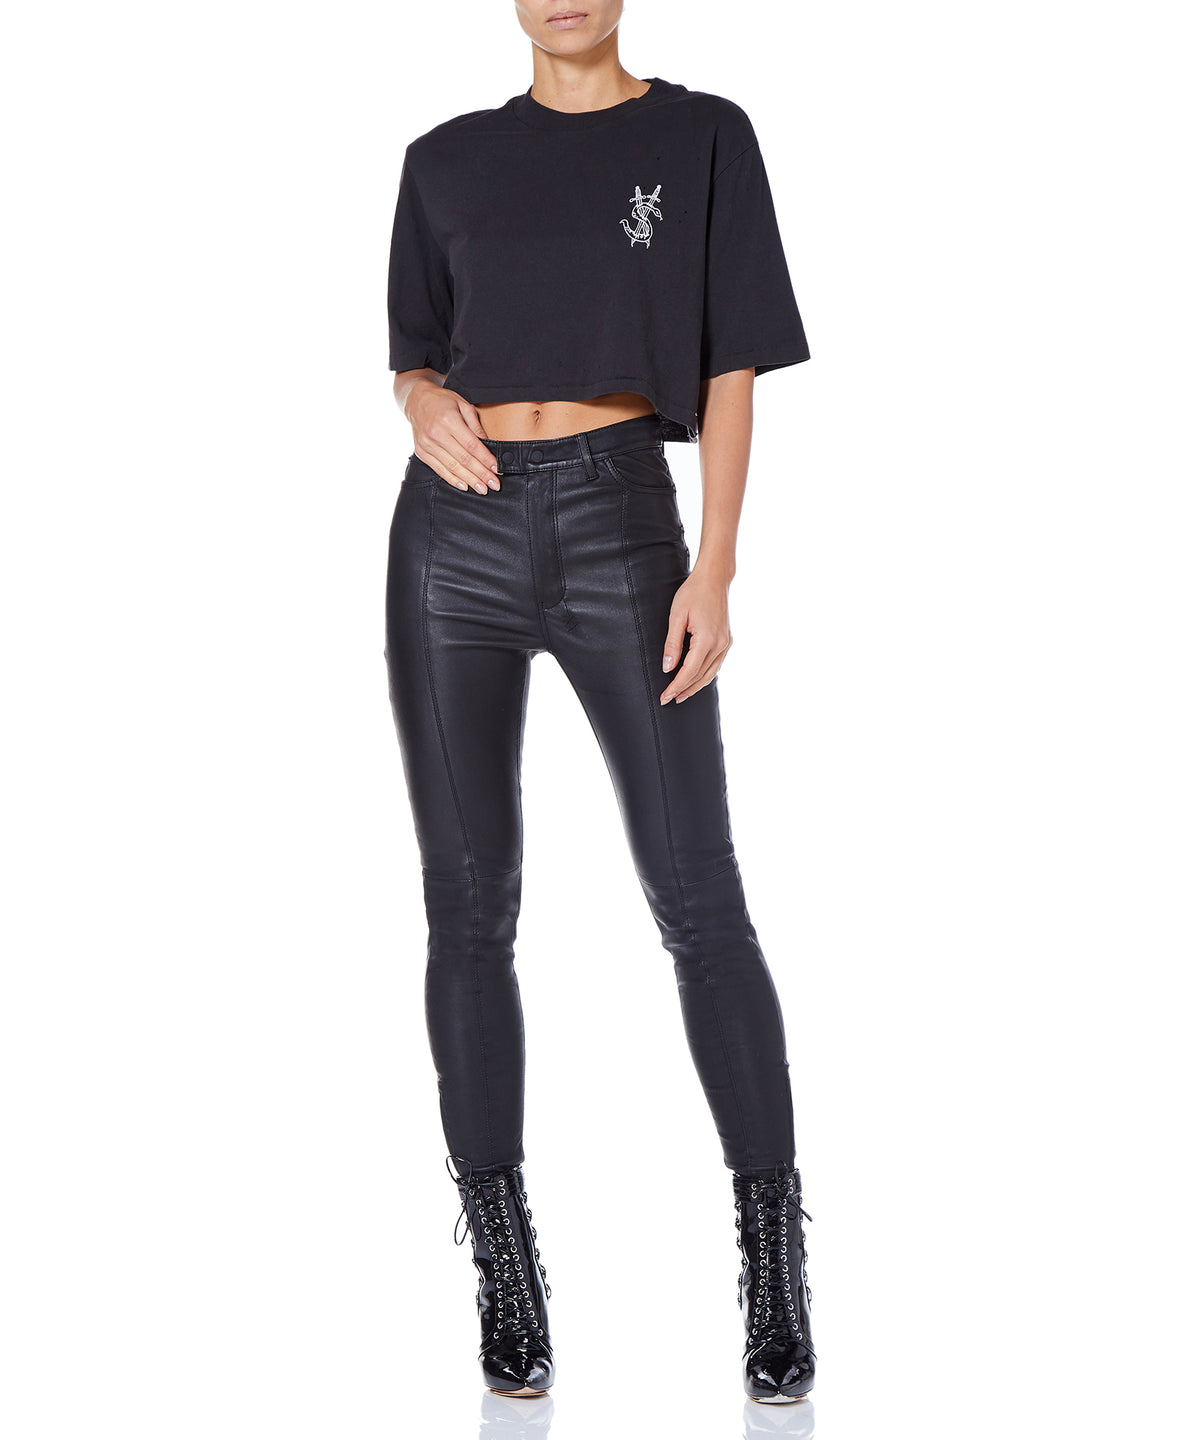 black leather jeans womens